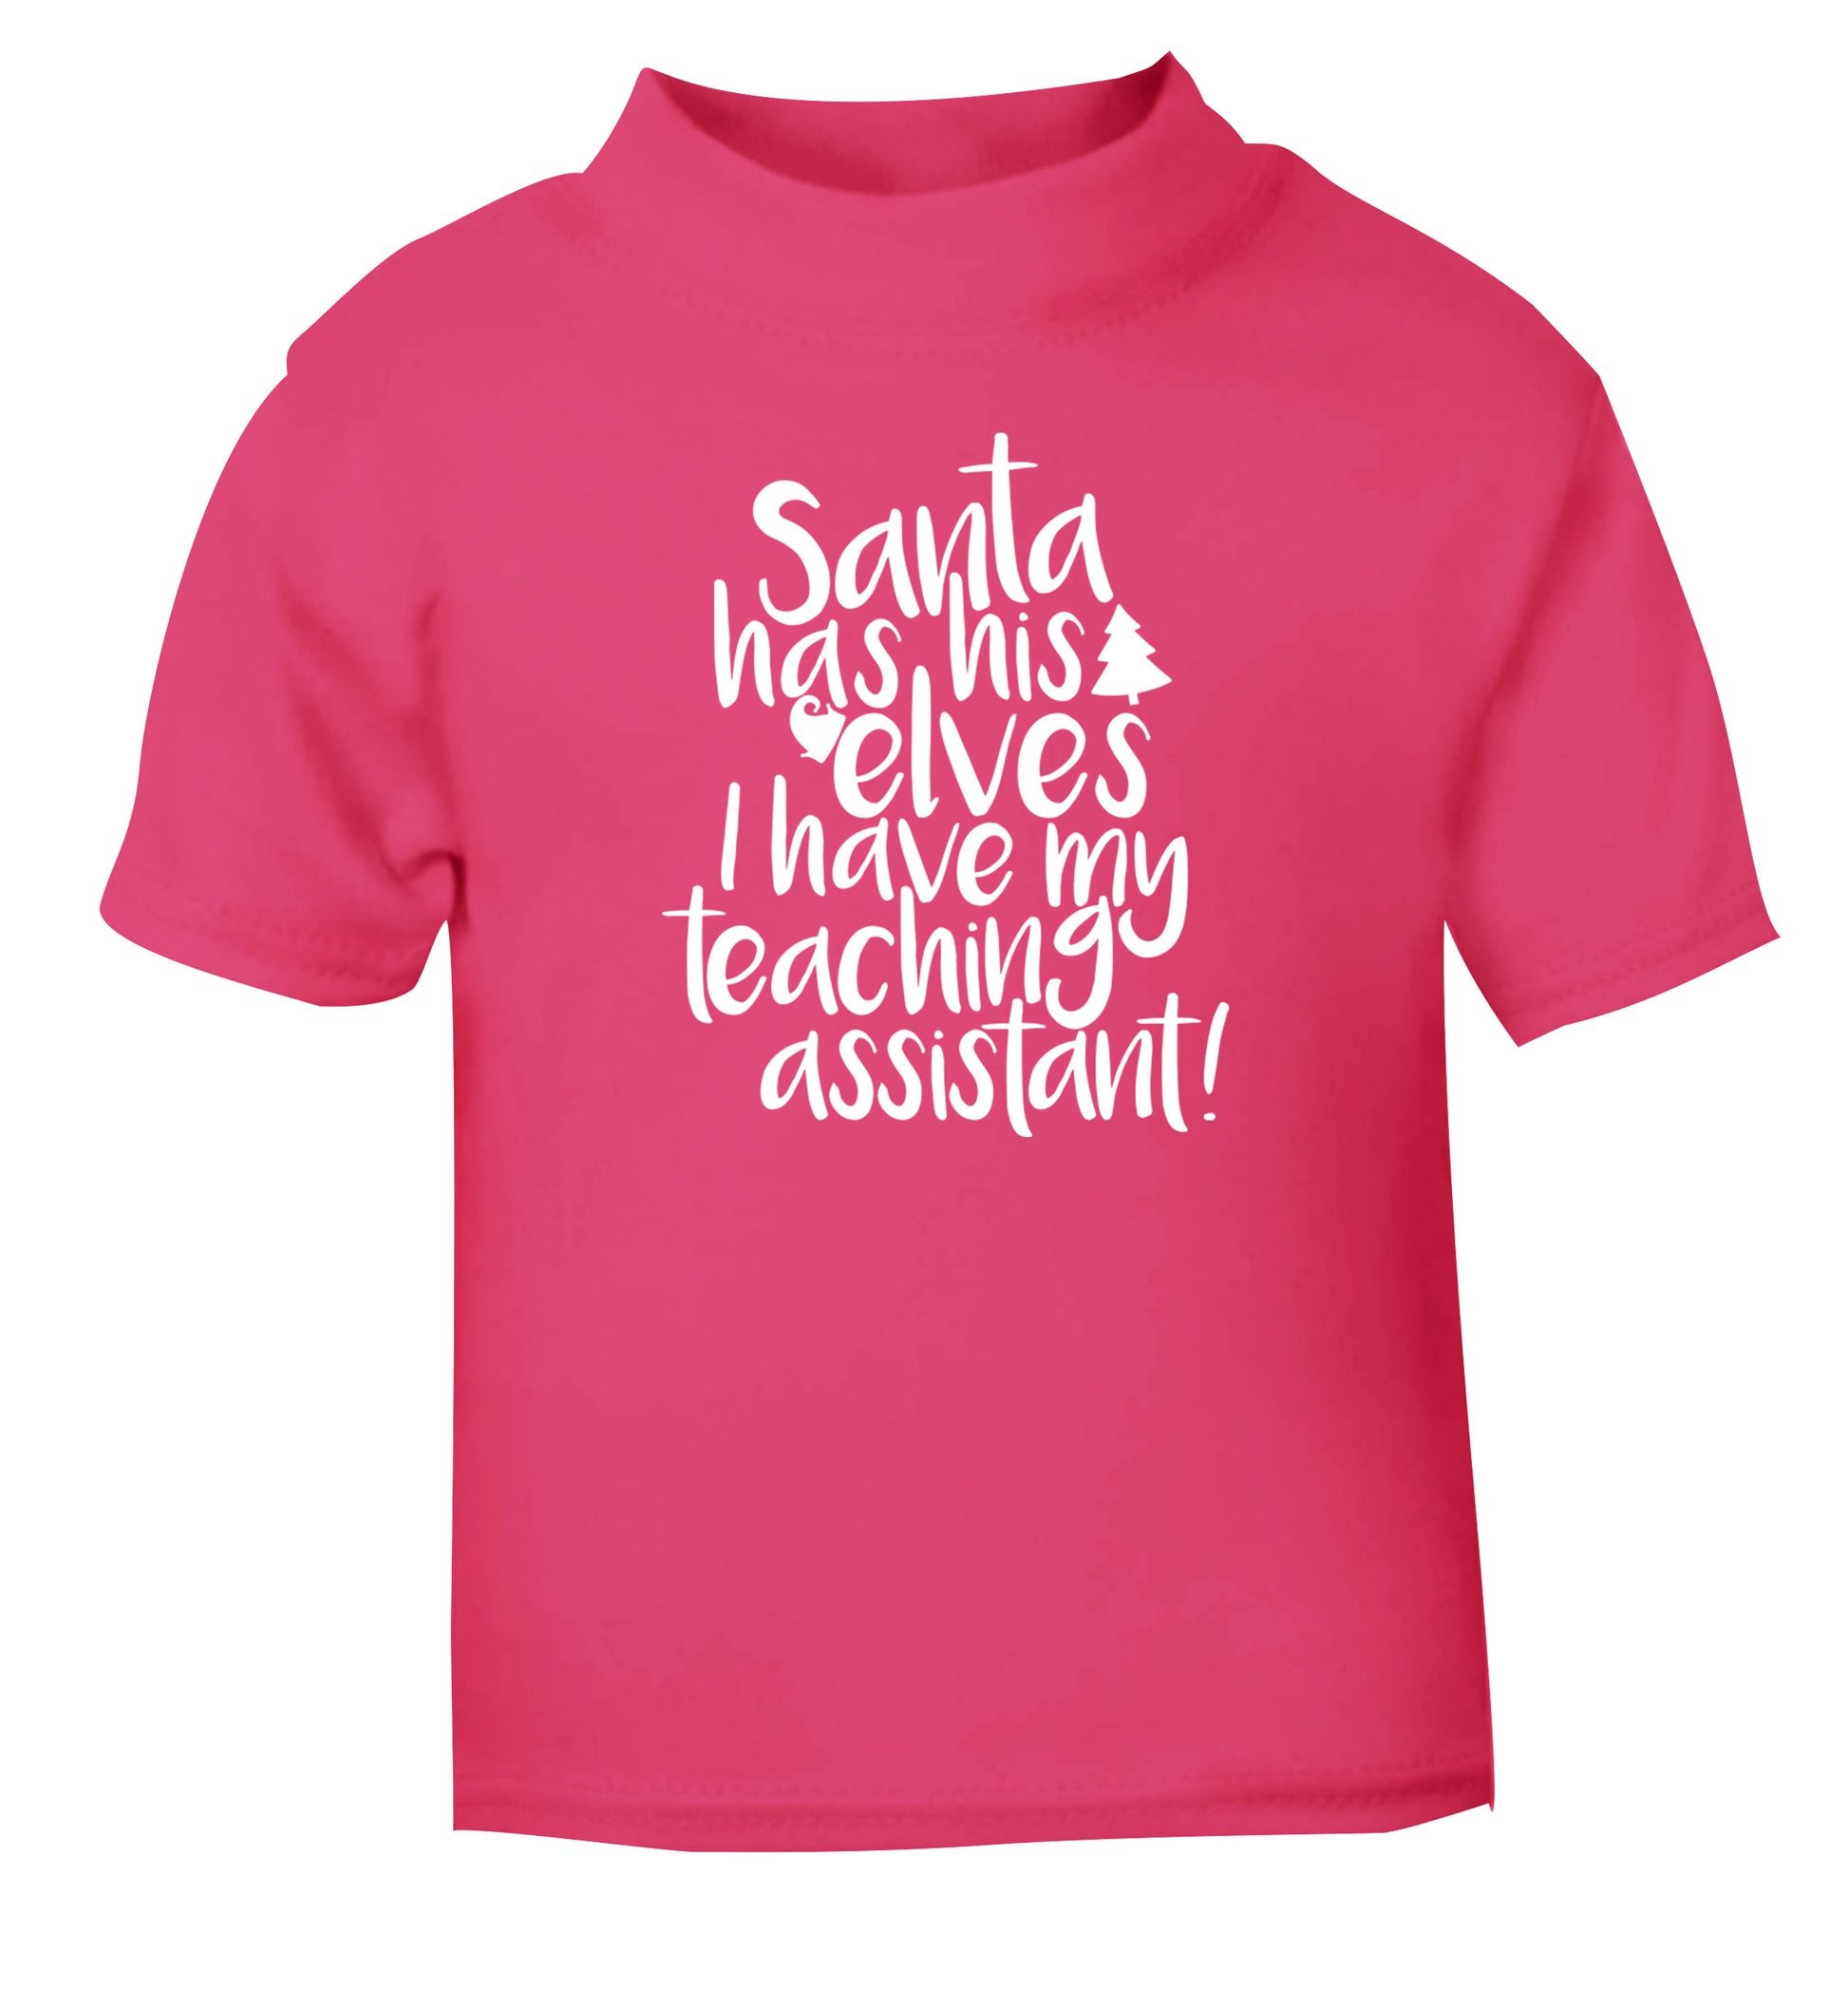 Santa has his elves I have my teaching assistant pink Baby Toddler Tshirt 2 Years